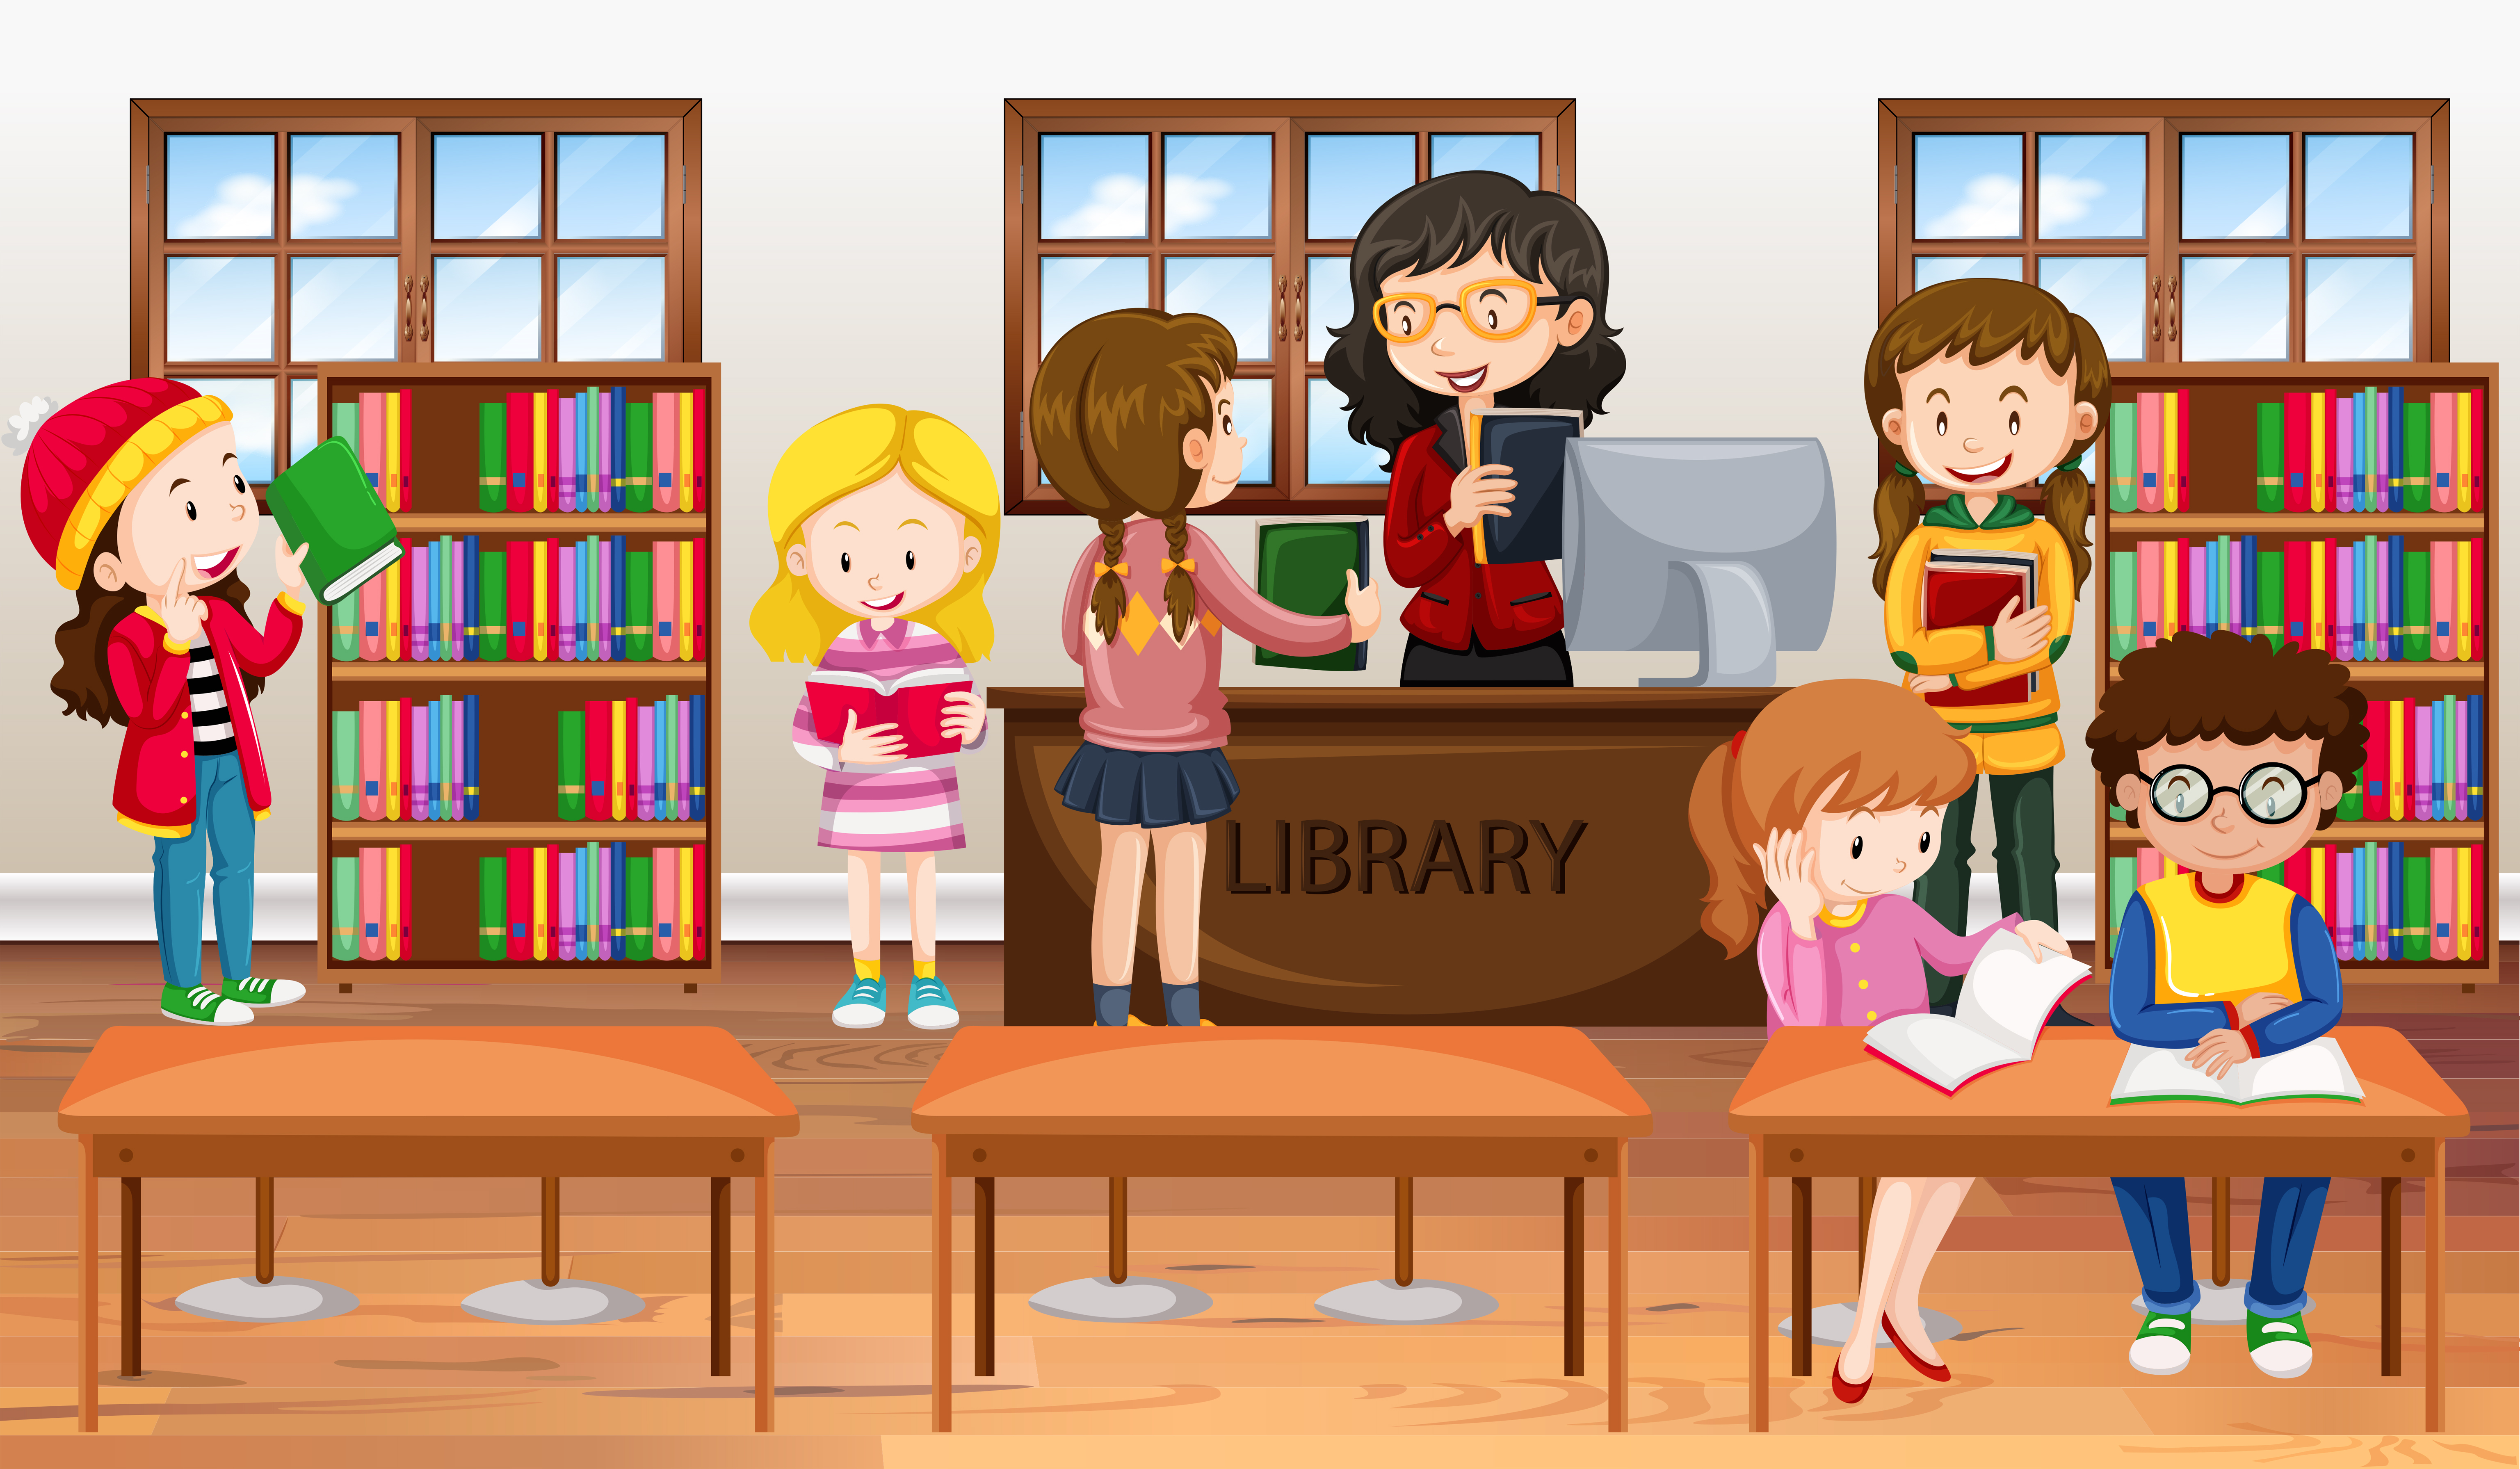 Download Library Books Free Vector Art - (4775 Free Downloads)